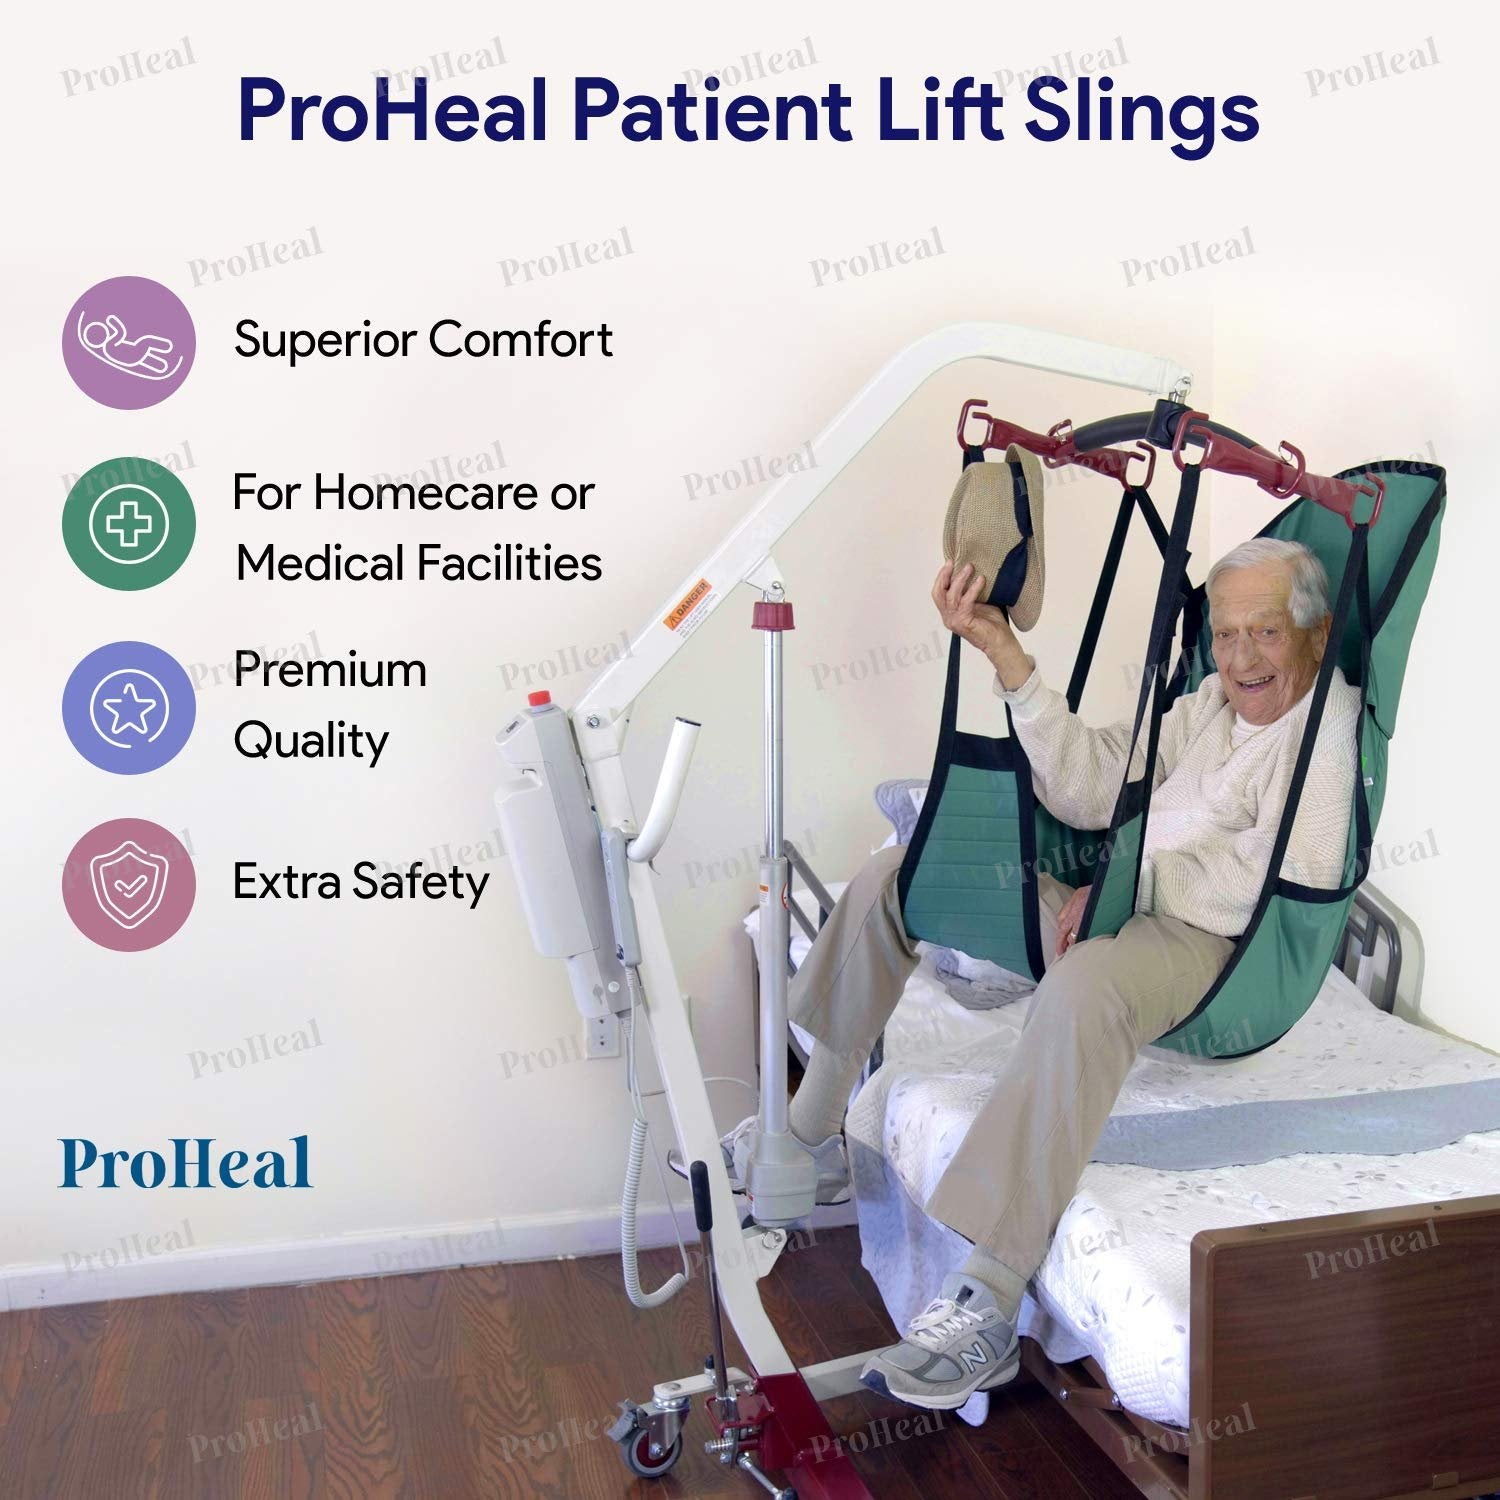 ProHeal Universal Full Body Lift Sling, X Large, 56"L x 43" - Solid Fabric Polyester Slings for Patient Lifts - Compatible with Hoyer, Invacare, McKesson, Drive, Lumex, Medline, Joerns and More